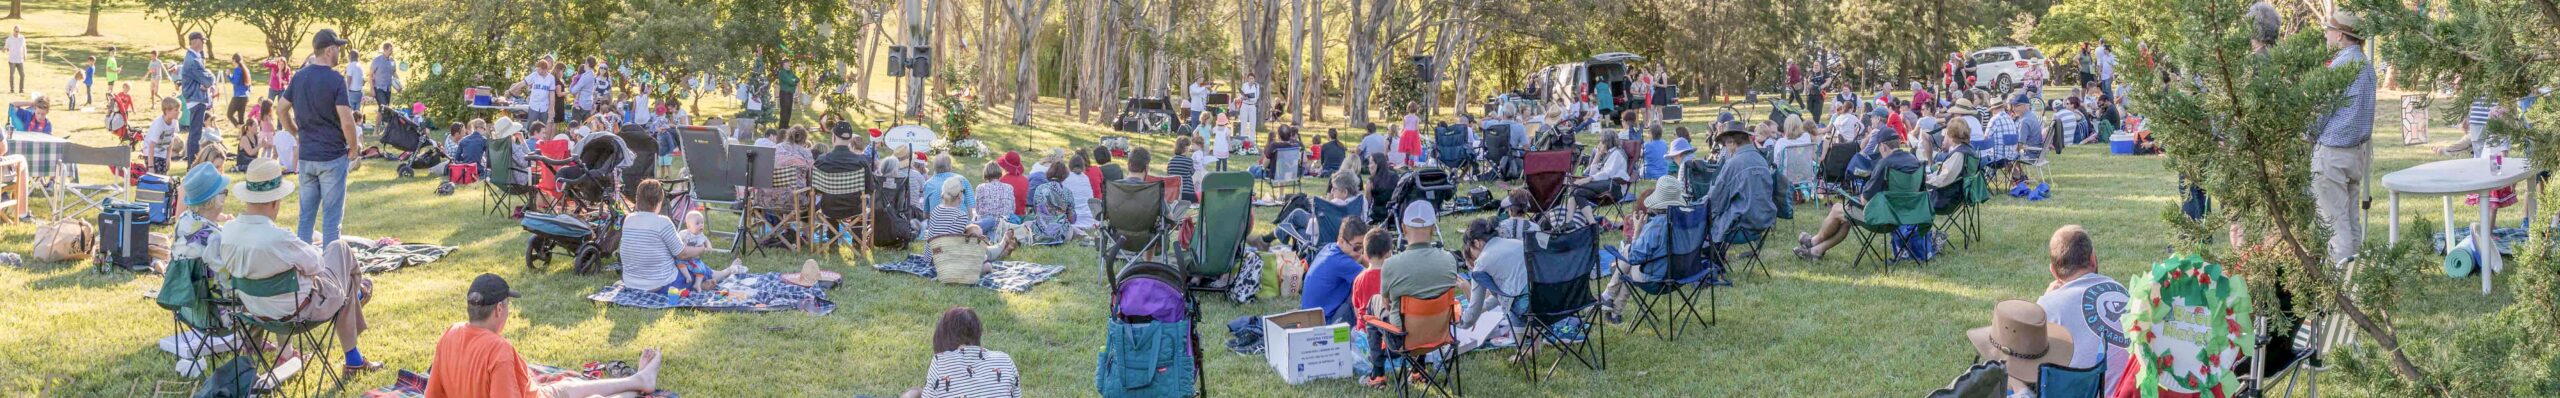 Public meeting 9 July 19  – Single use plastic, and redevelopment of Narrabundah Gowrie Court site